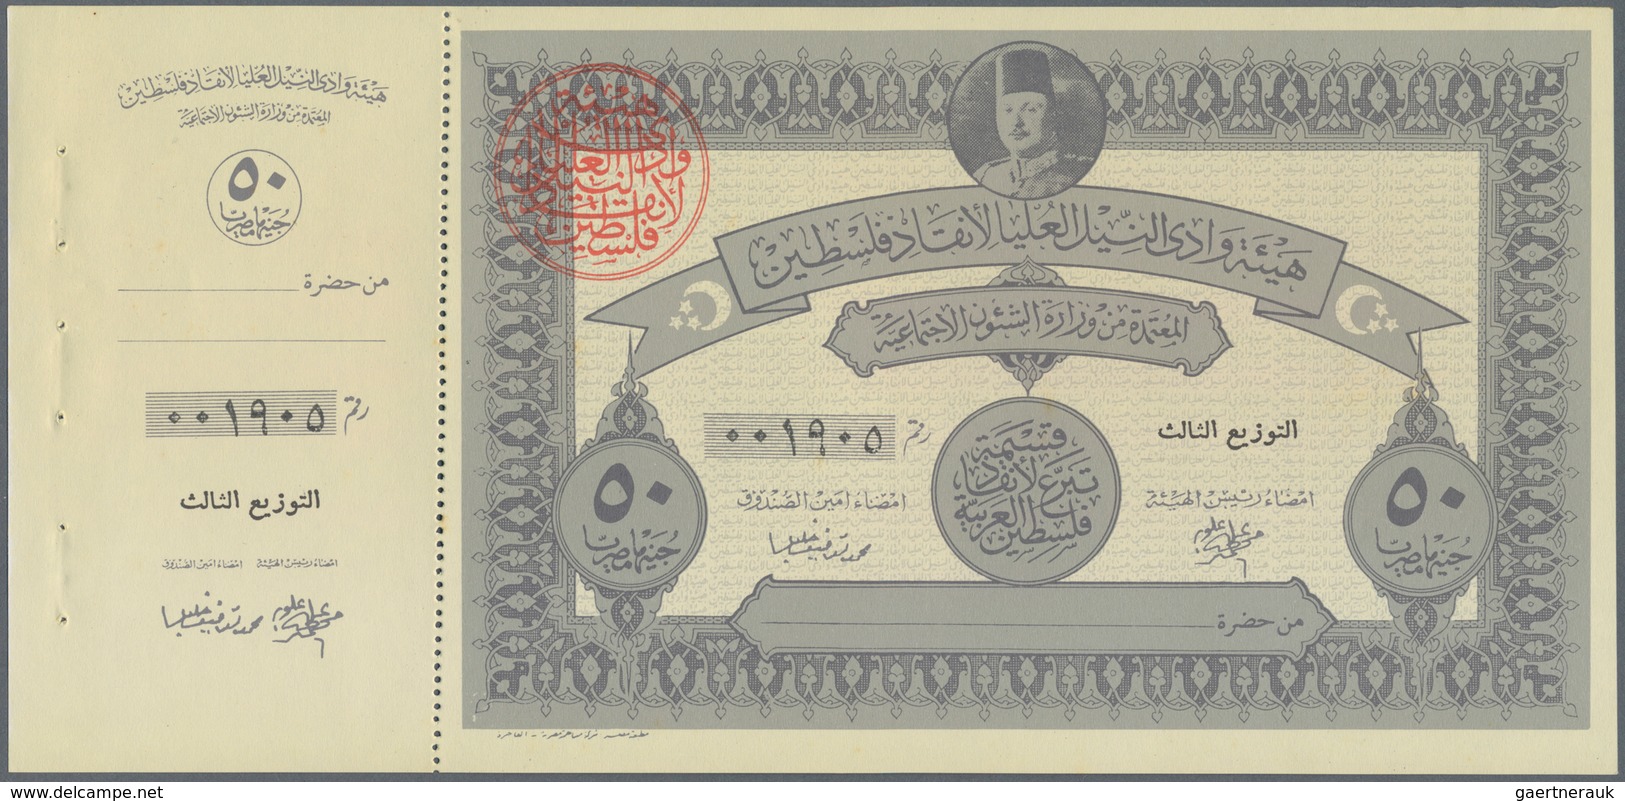 Egypt / Ägypten: Nice Set With 6 Pcs. Of The Palestine War Fund Notes Remainder With Portrait Of Kin - Egipto